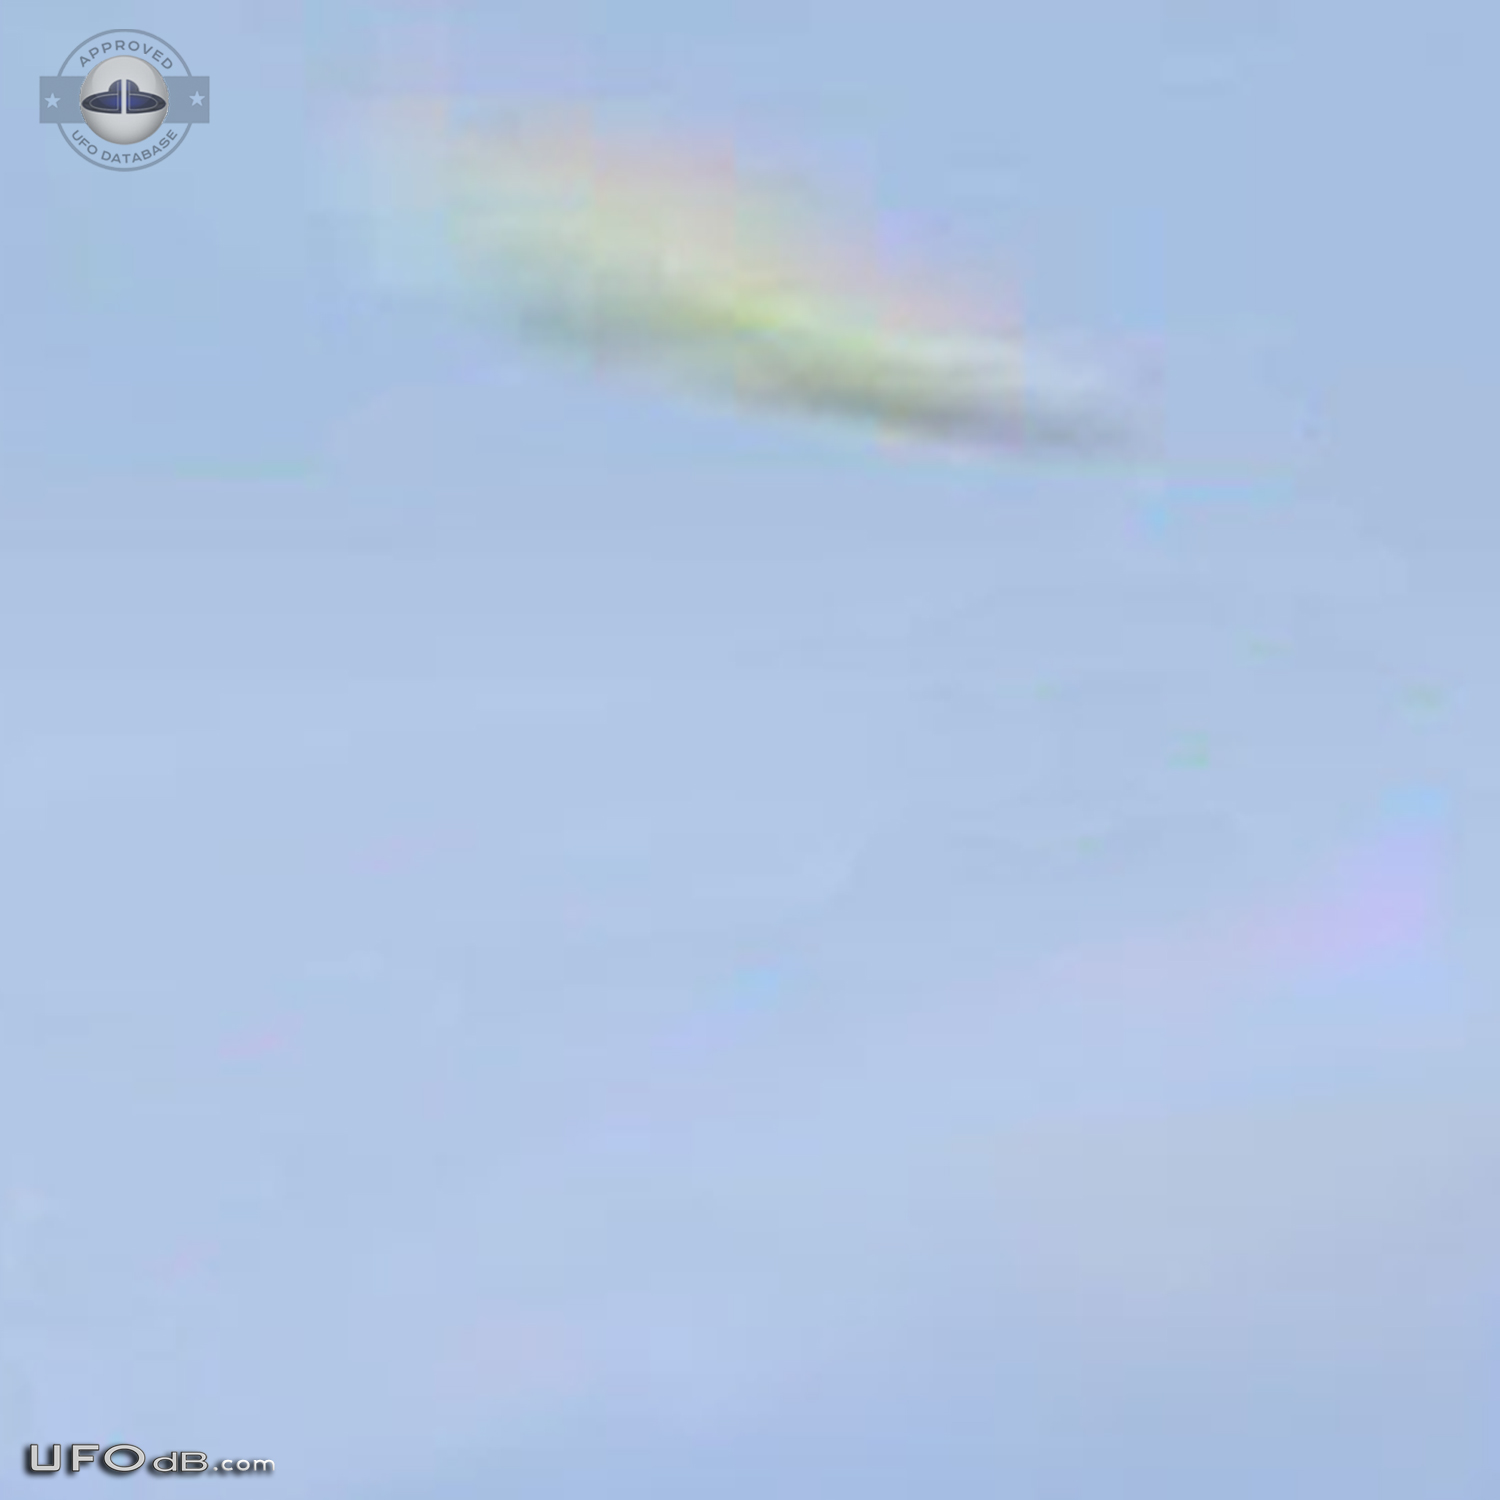 Saucer UFO caught on picture near the Maya city ruins of Tulum - 2011 UFO Picture #413-4